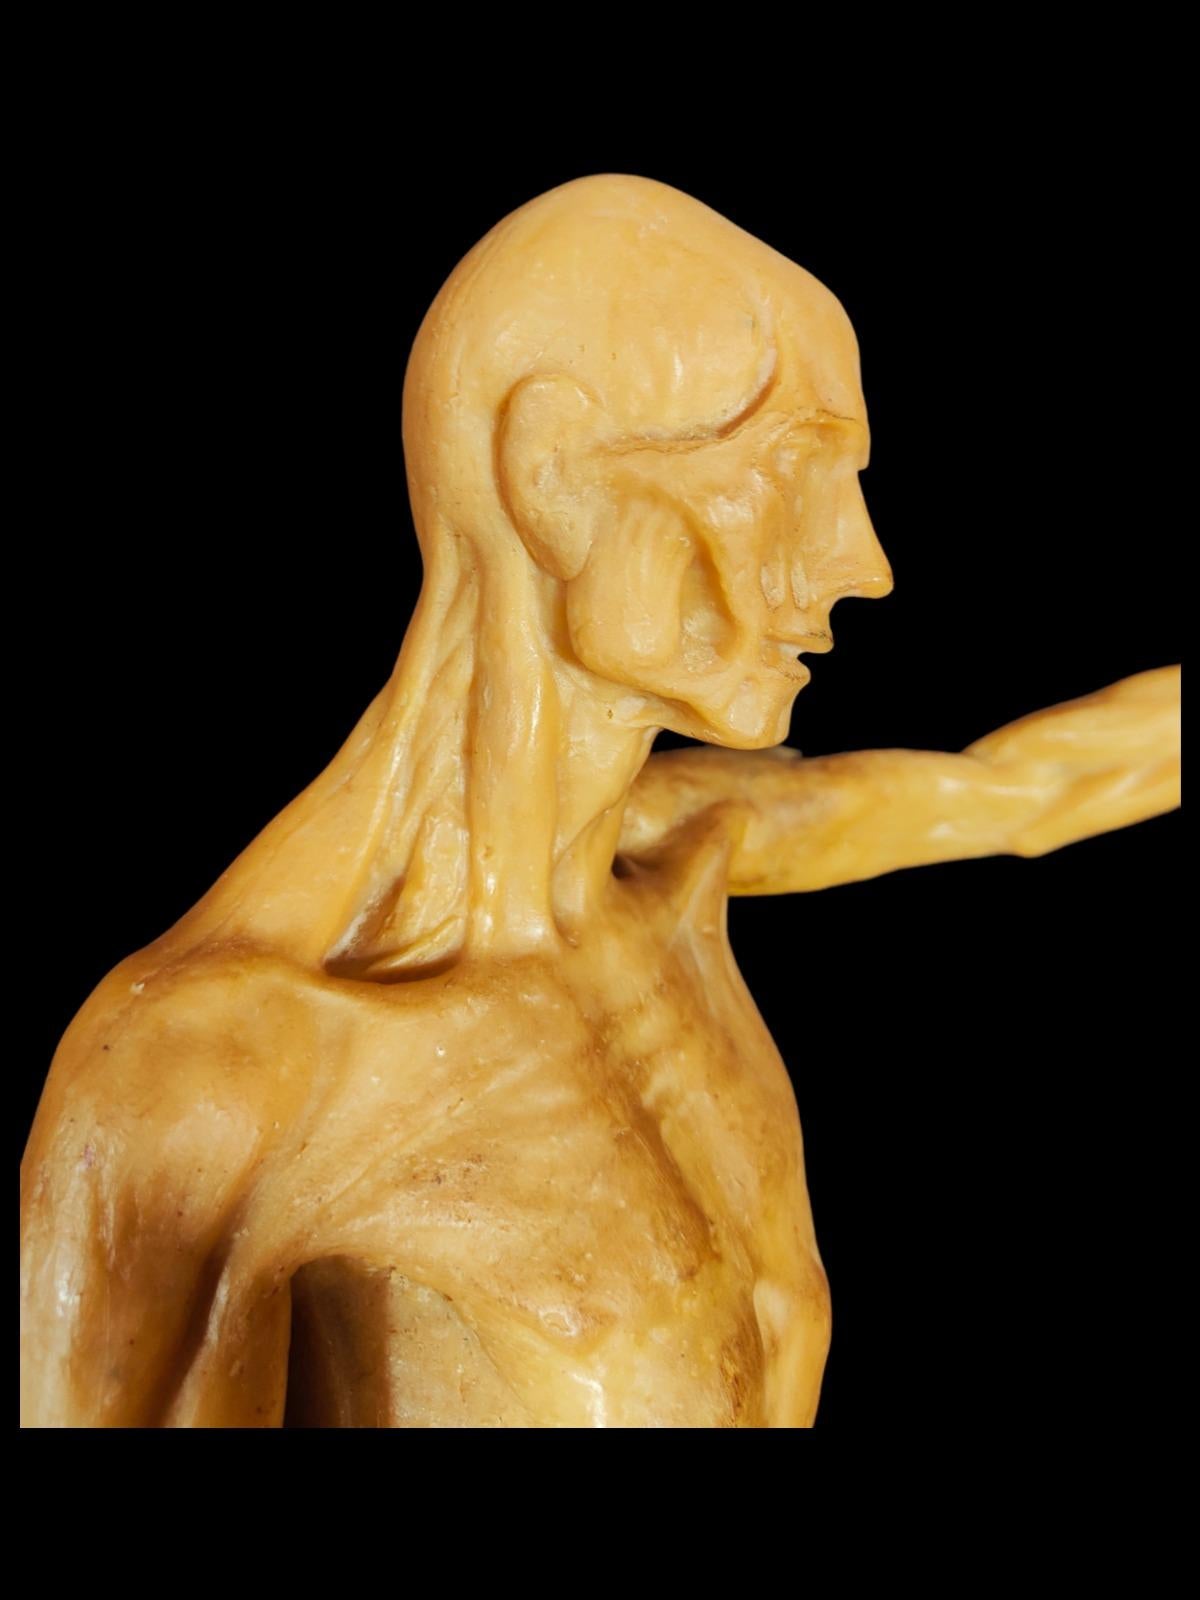 Hand-Crafted Anatomical Model in Wax from the 18th Century For Sale